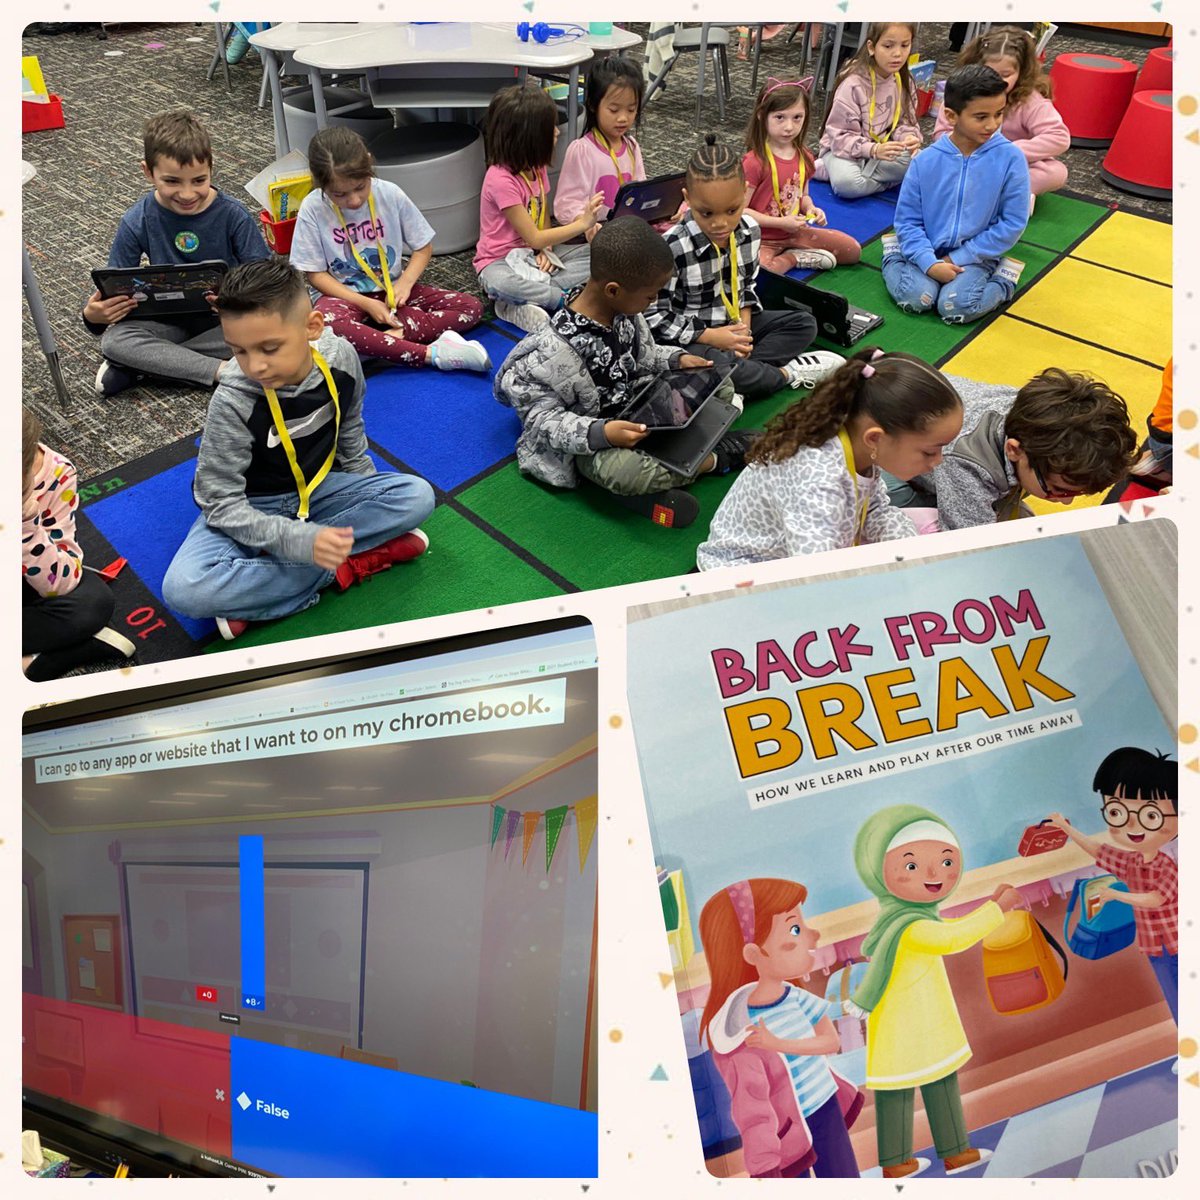 We reviewed classroom expectations by reading “Back From Break”, learning about zones of regulation, and playing a Kahoot. We’ve got the rest of this school year in the bag! #BOTB @CyFairISD @BlackBearkats